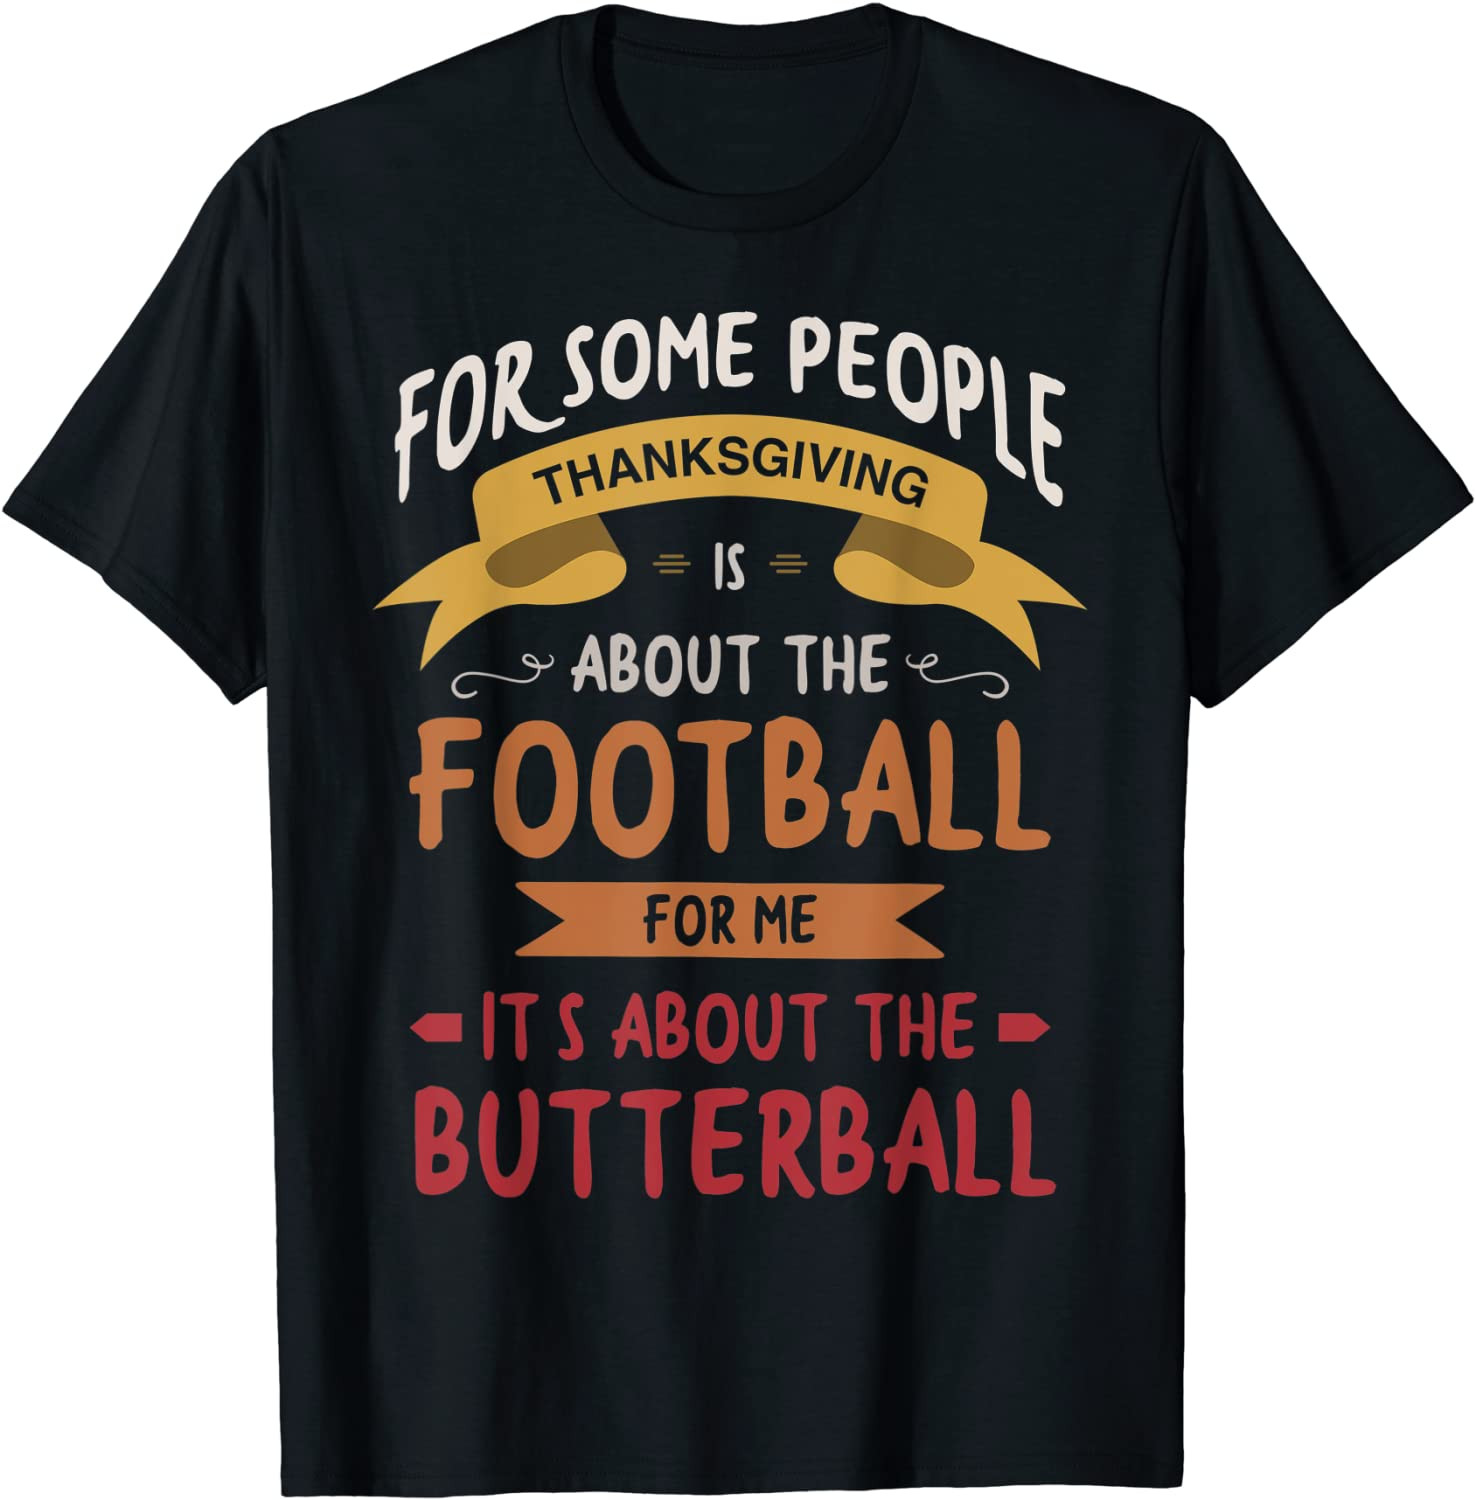 Butterball Lovers Outfits Apparel Thanksgiving T-Shirt